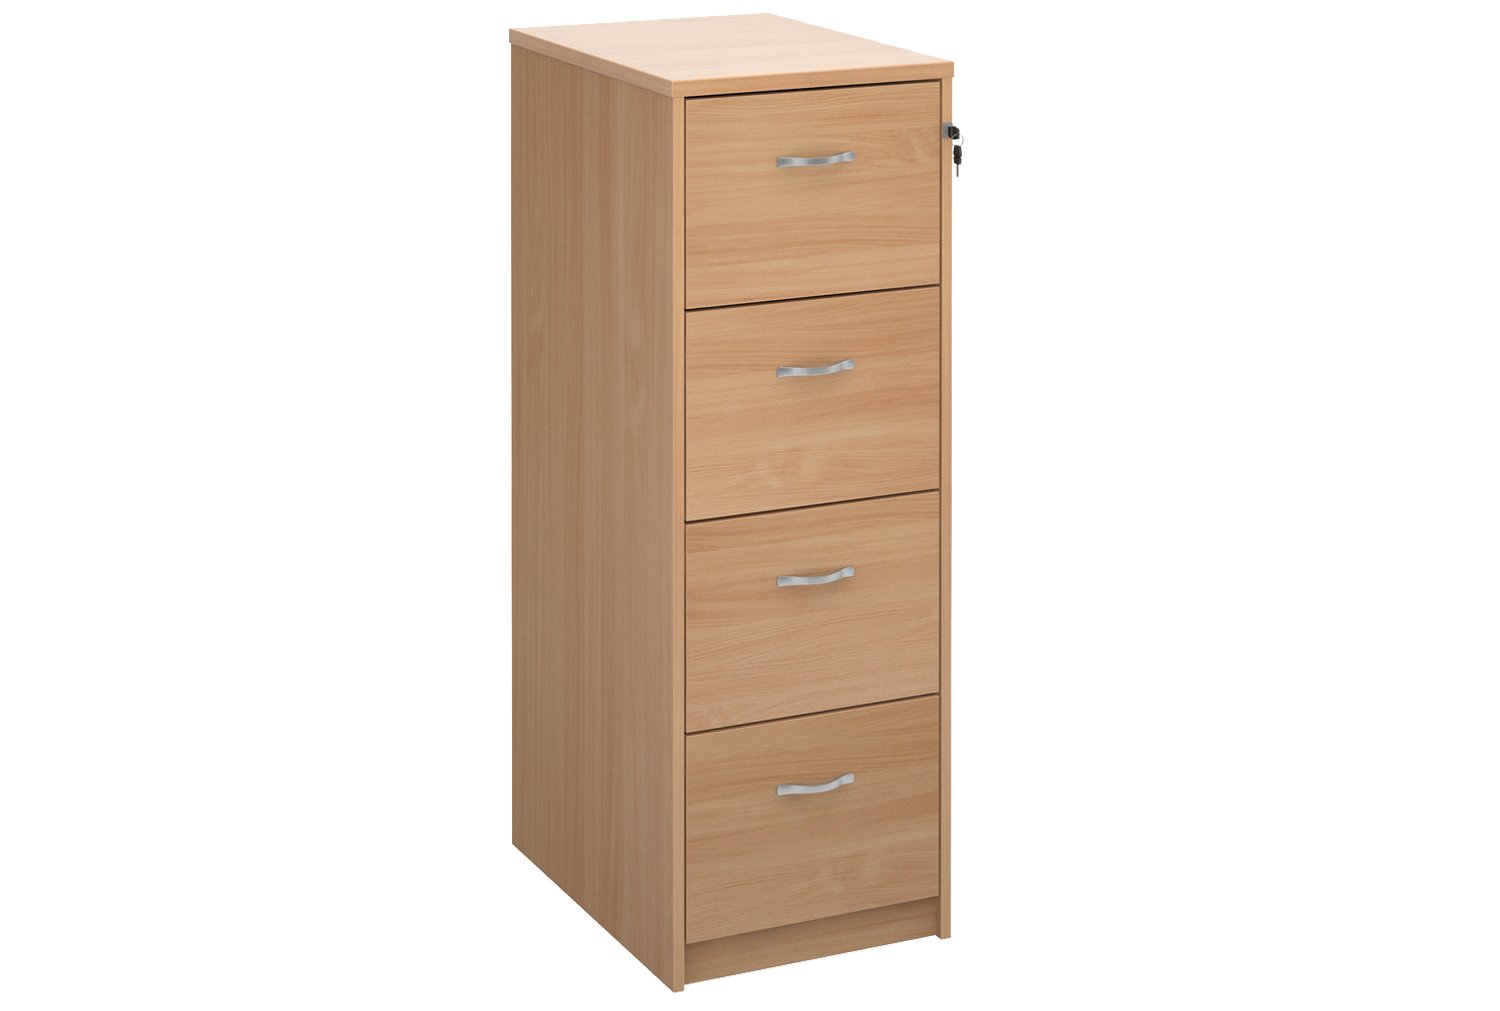 Wooden Filing Cabinets, 4 Drawer - 48wx66dx136h (cm), Beech